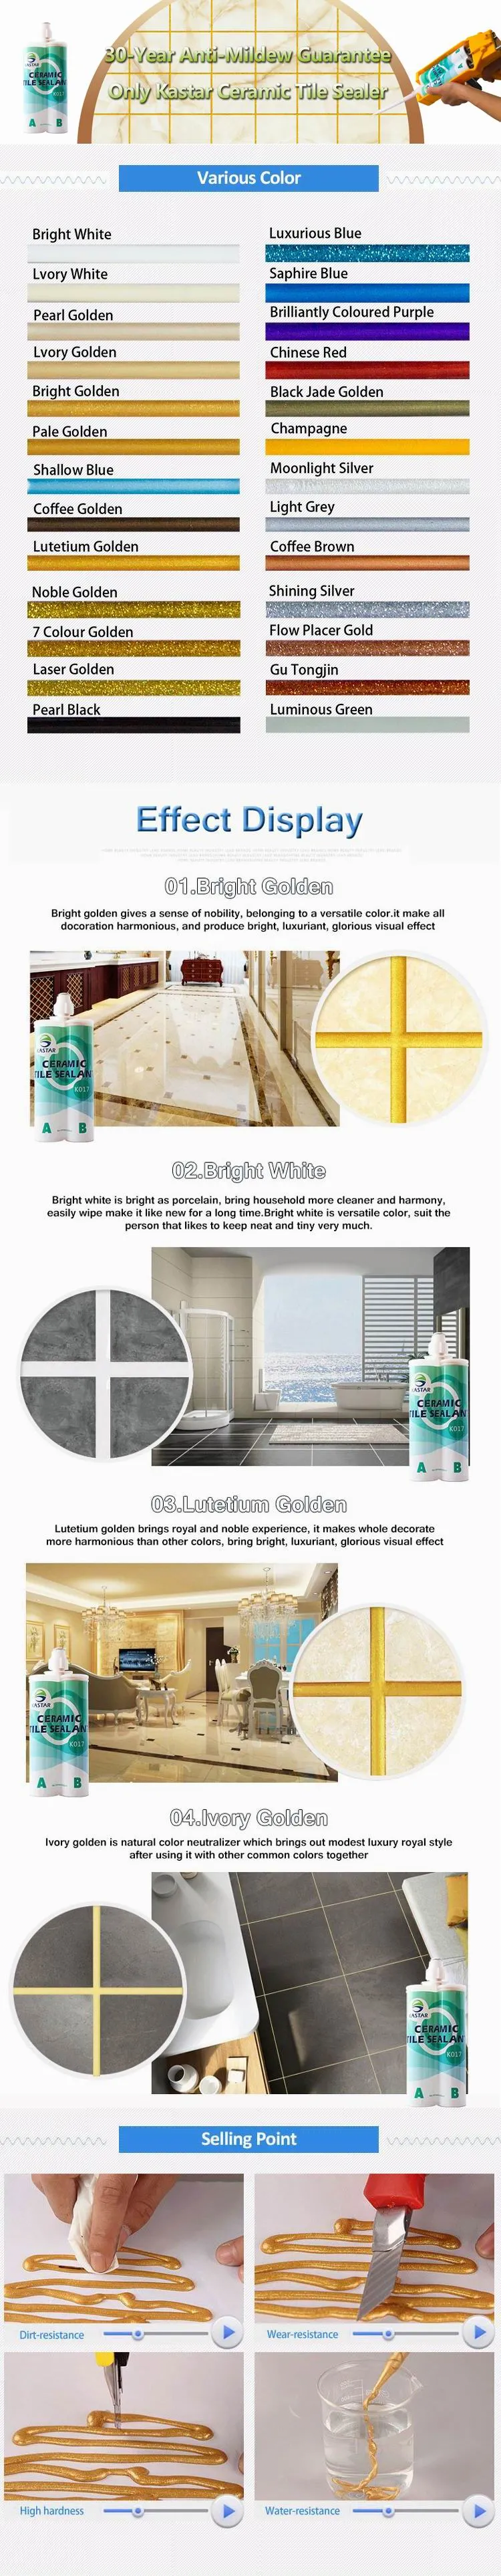 Stain Resistance Easy to Clean Waterproof Ceramic Tile Adhesive for Tile Gaps Beautify